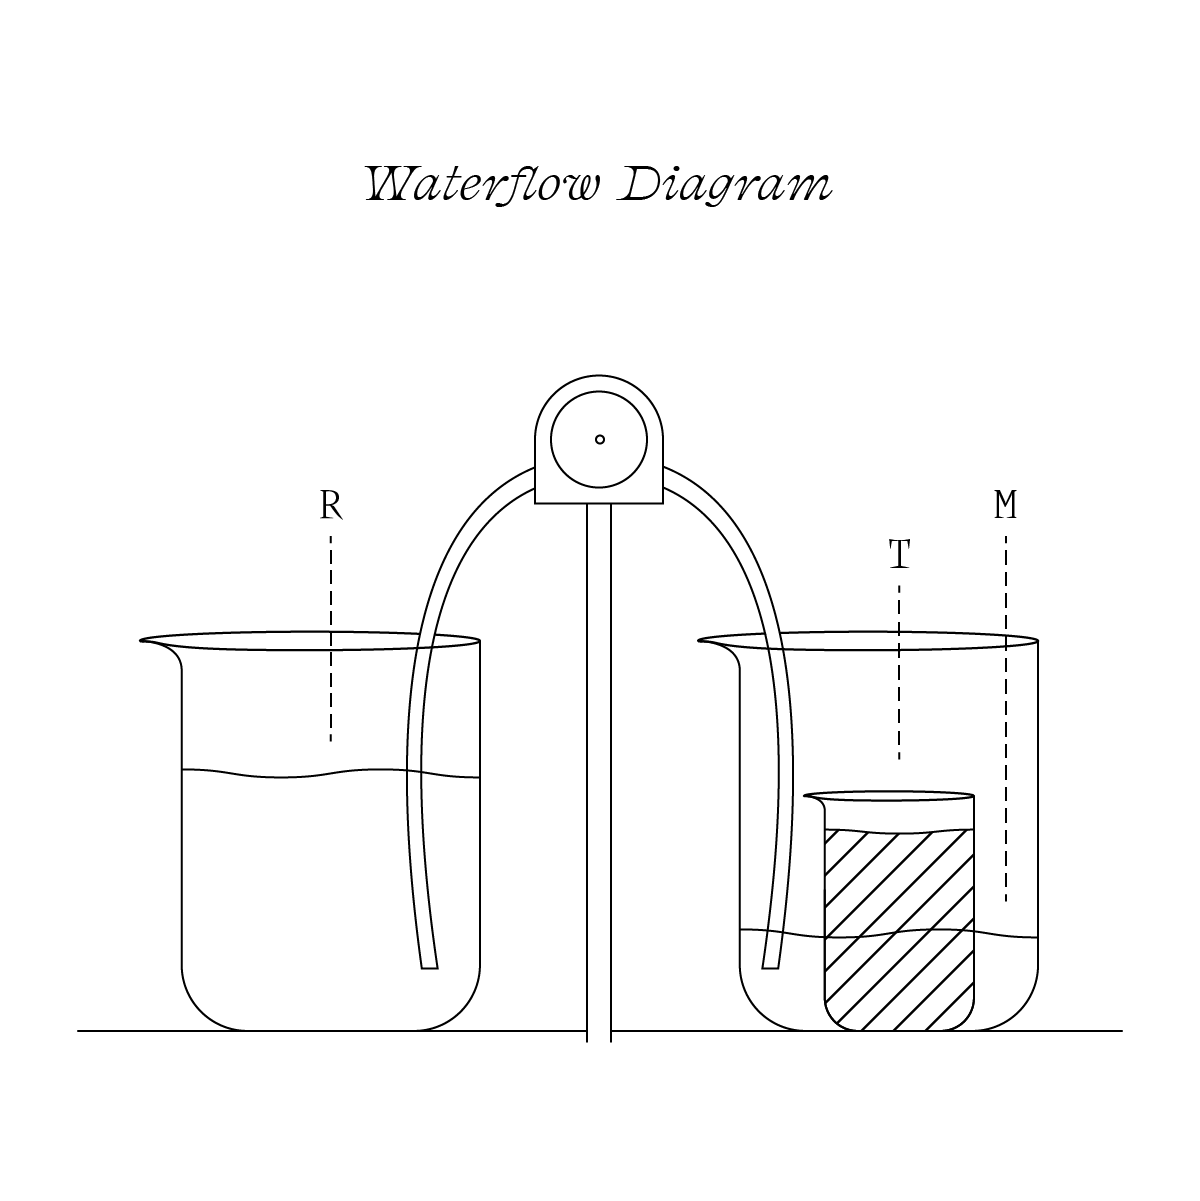 Technical illustration explaining the sculptural component of the installation